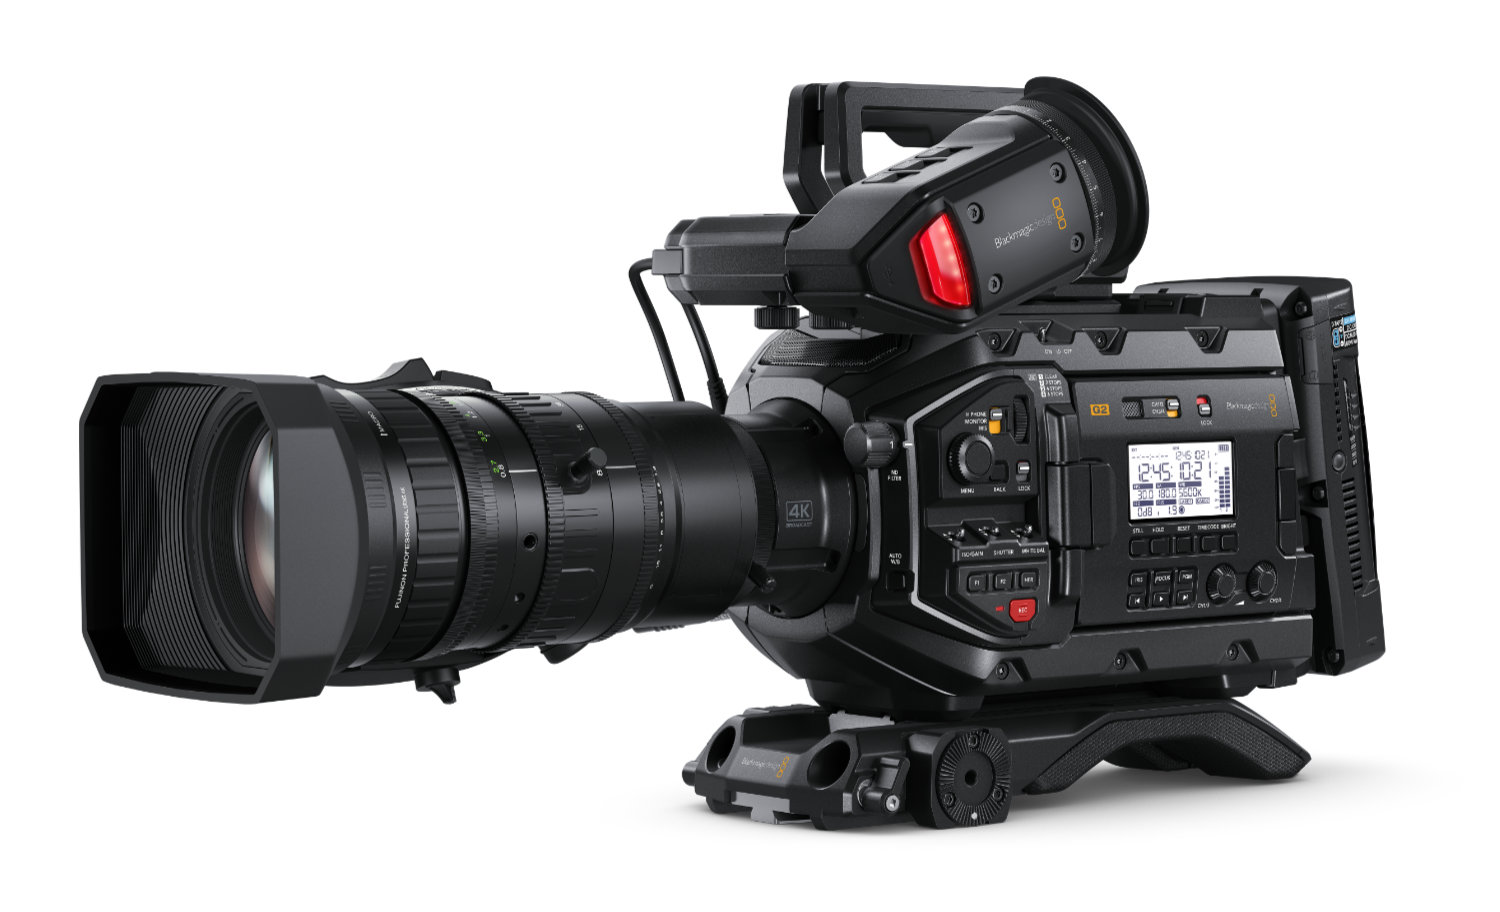 Blackmagic Camera 7.9.2 update brings among other things gyro data for URSA Broadcast G2